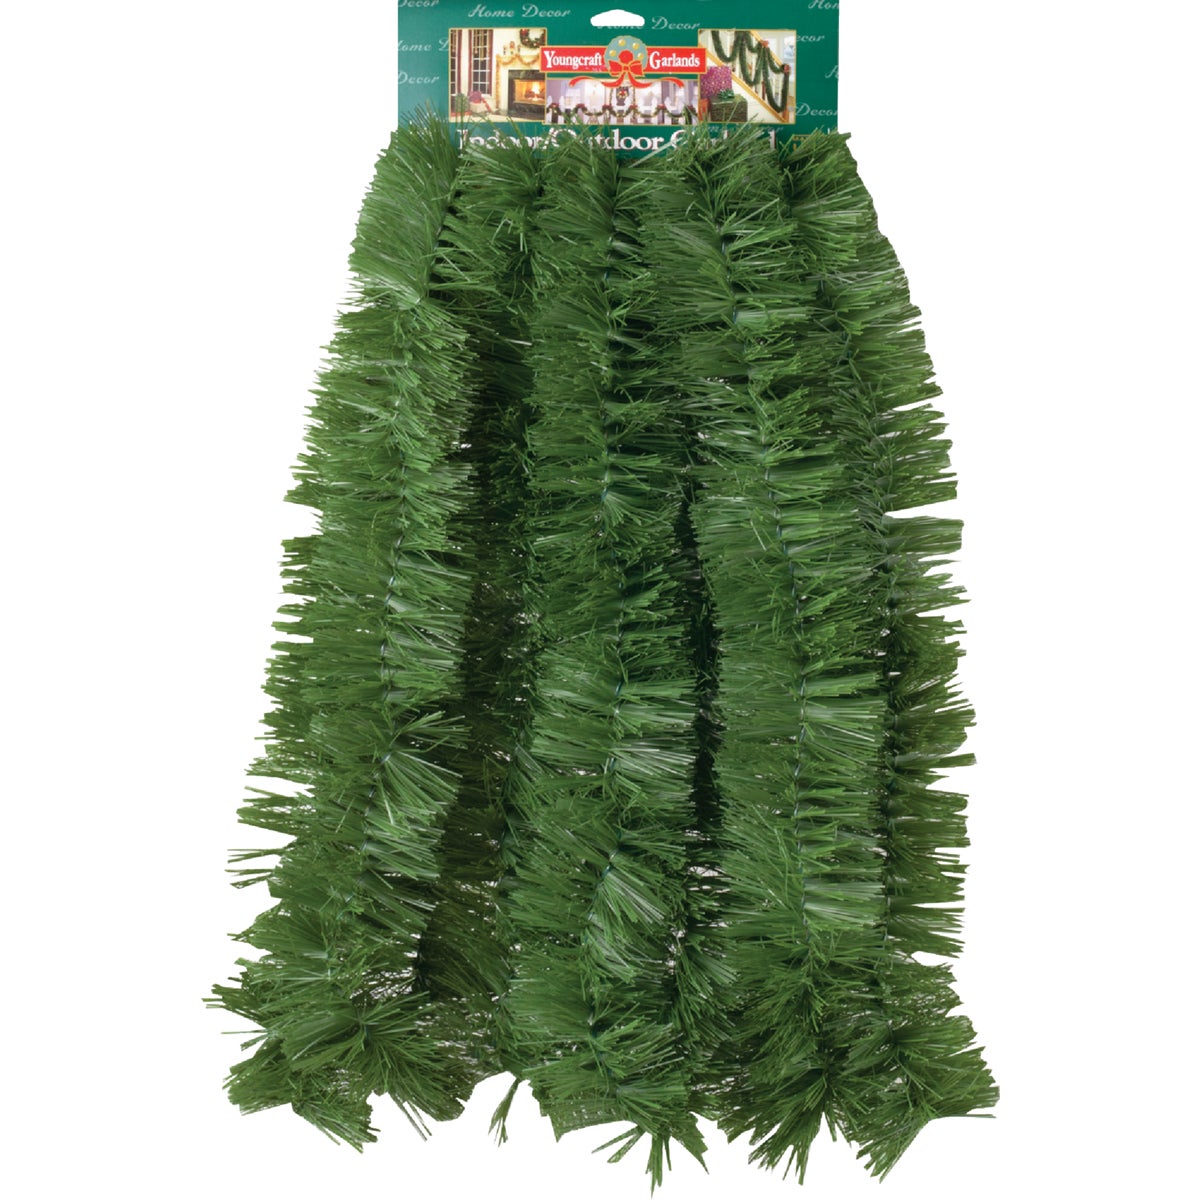 Item 901929, 15-foot solid green decorating garland. Ideal for indoor or outdoor use.